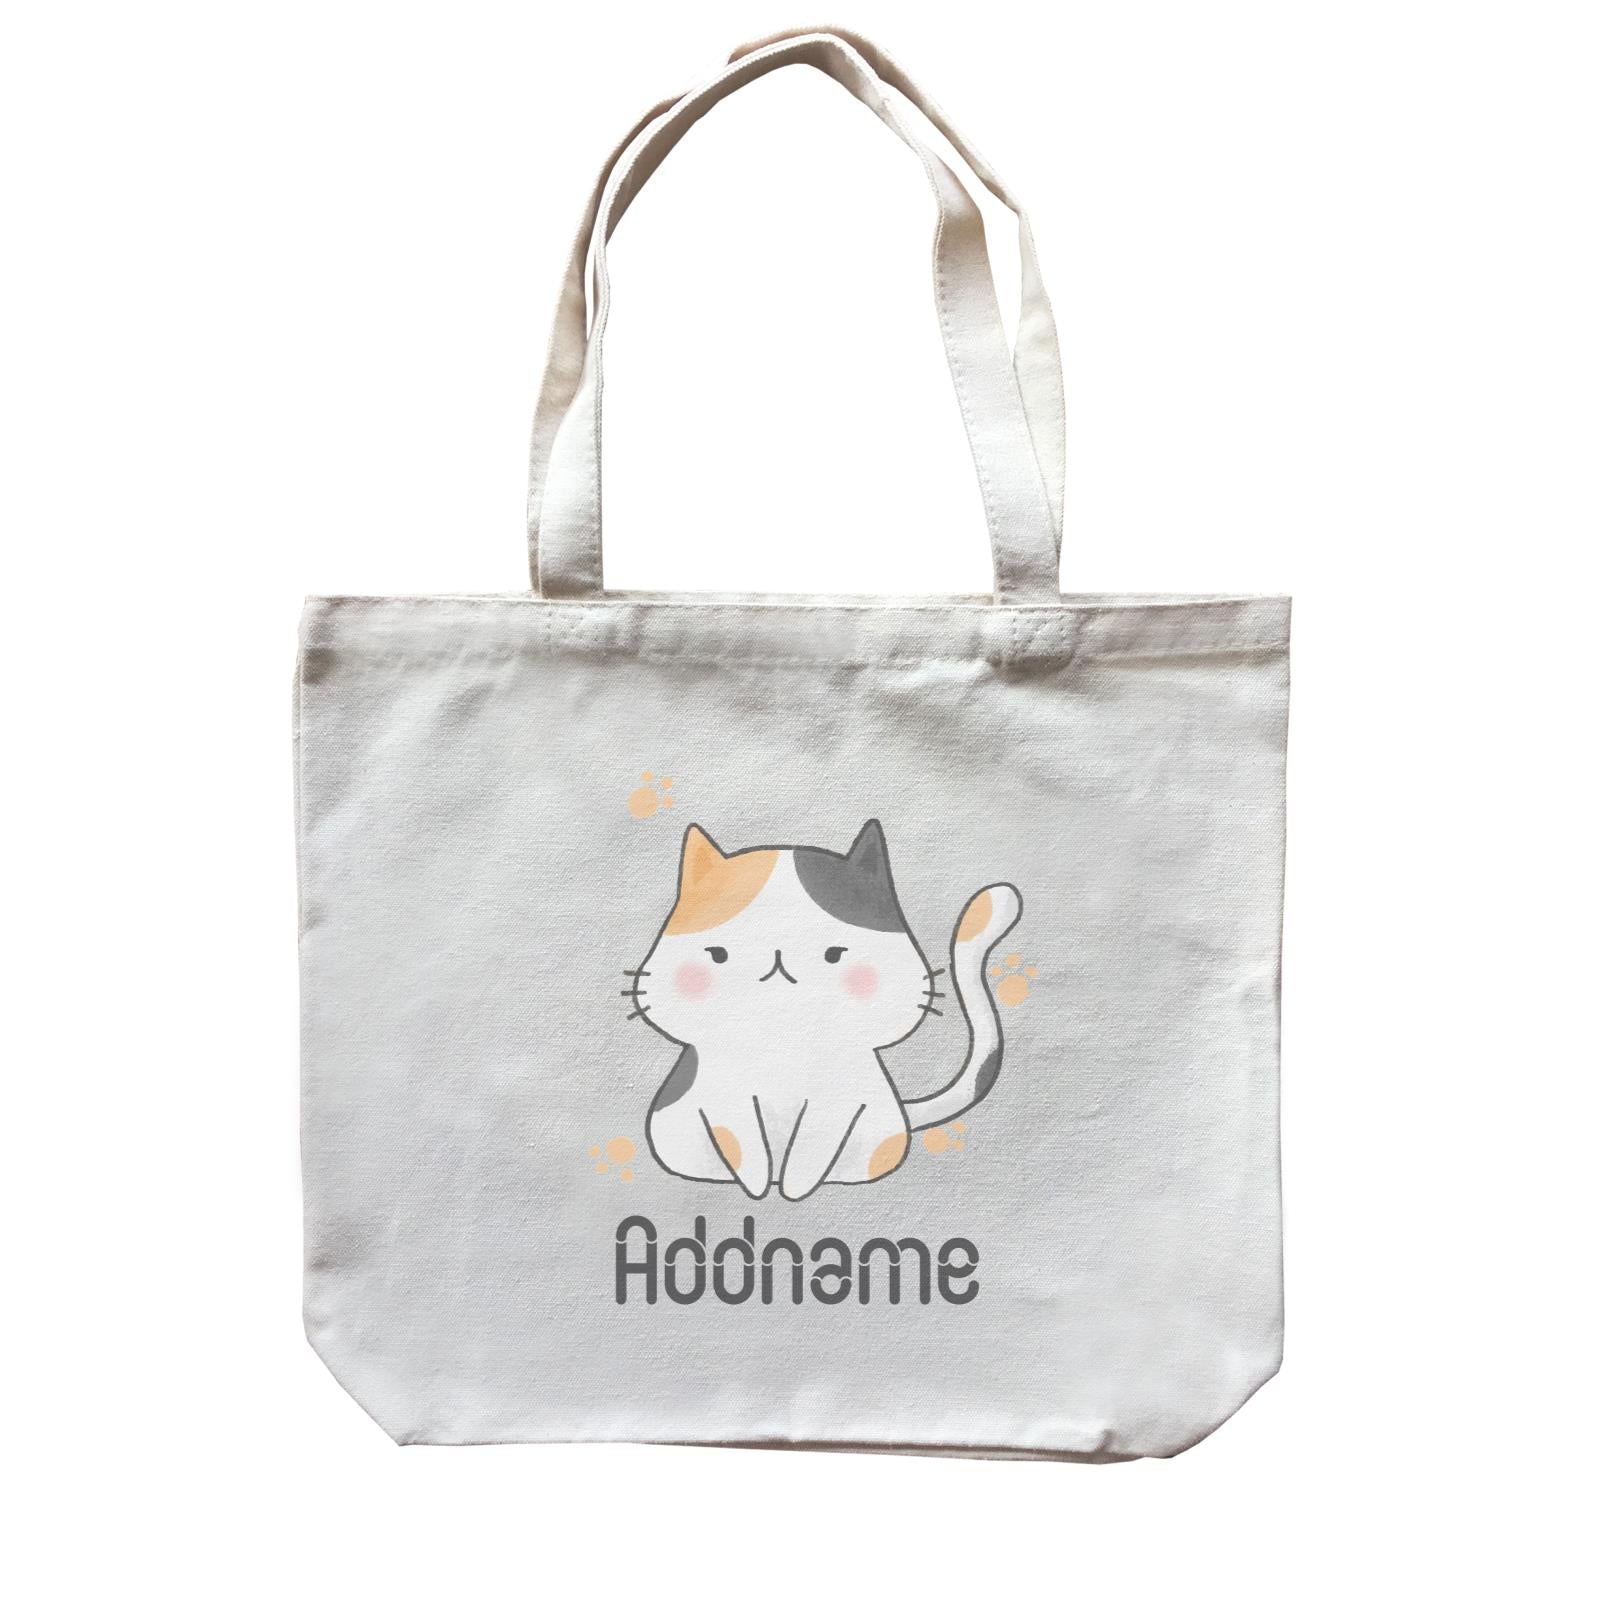 Cute Hand Drawn Style Cat Addname Canvas Bag